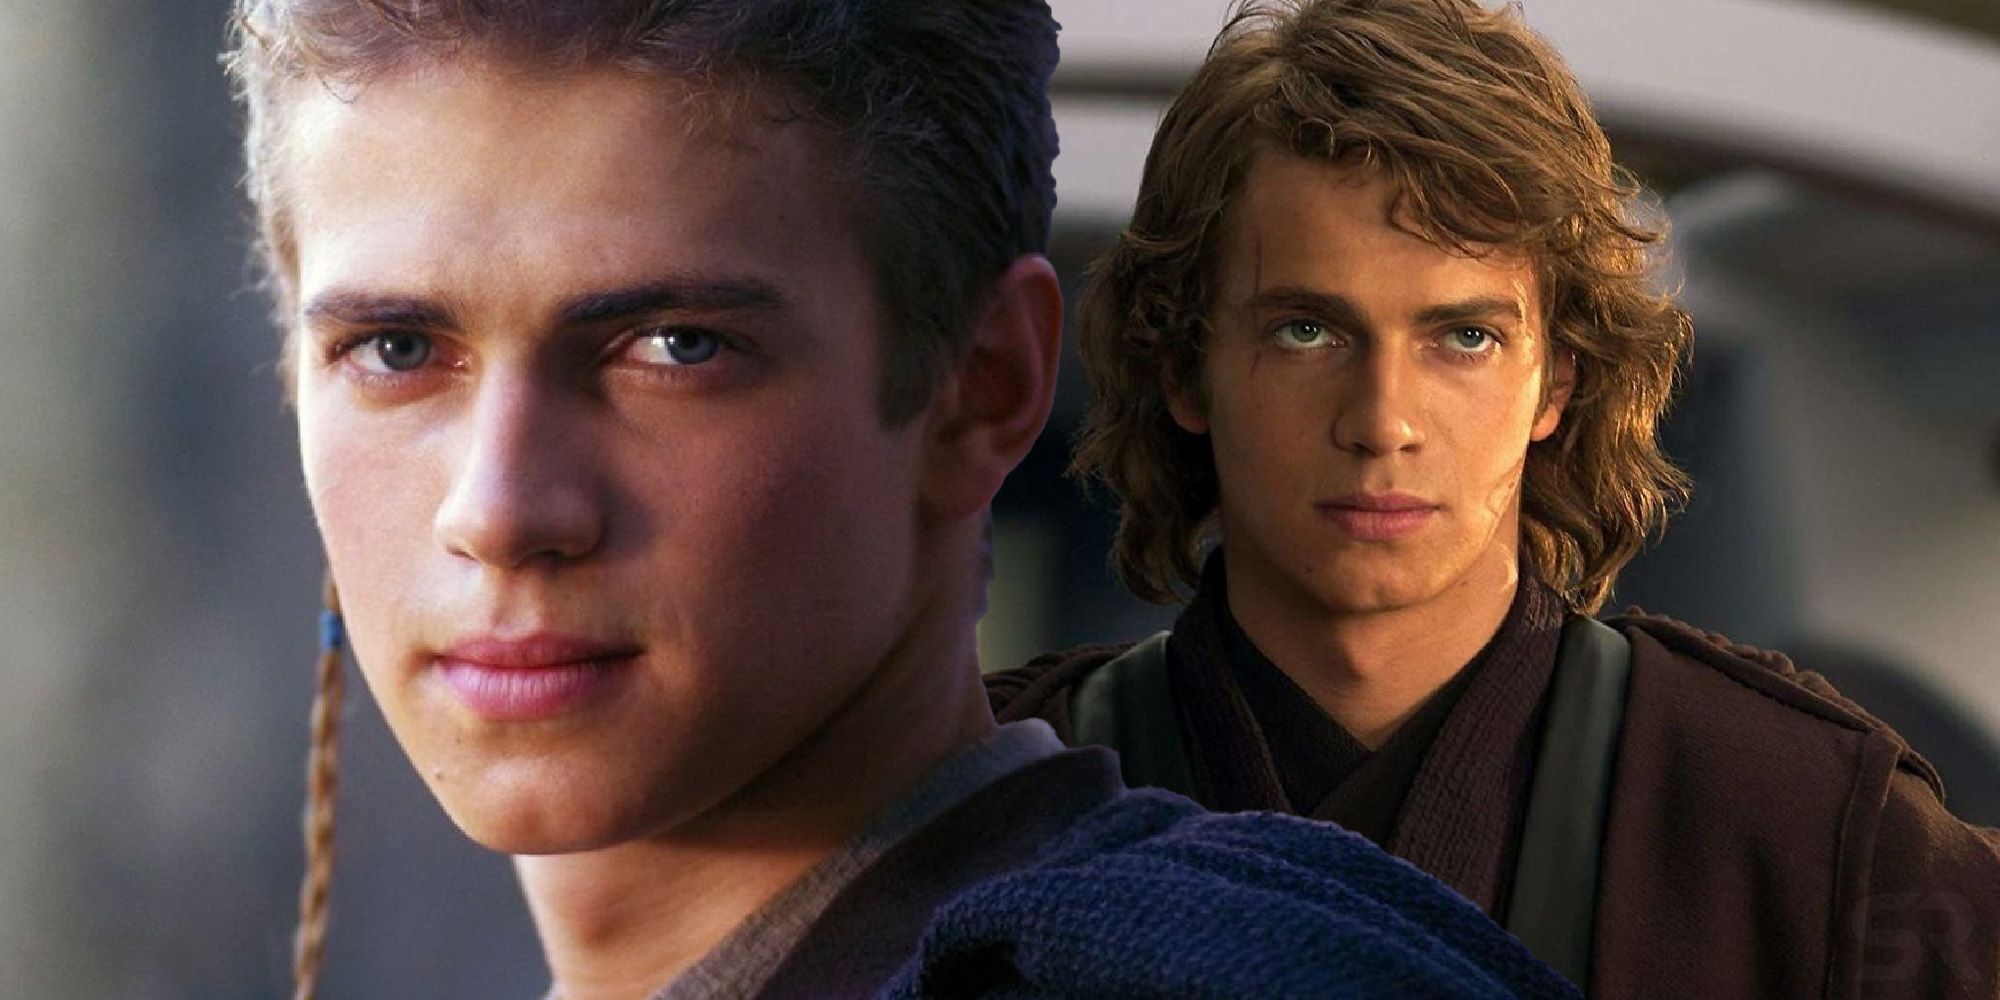 Anakin Star Wars Attack Of The Clones Revenge Of The Sith 